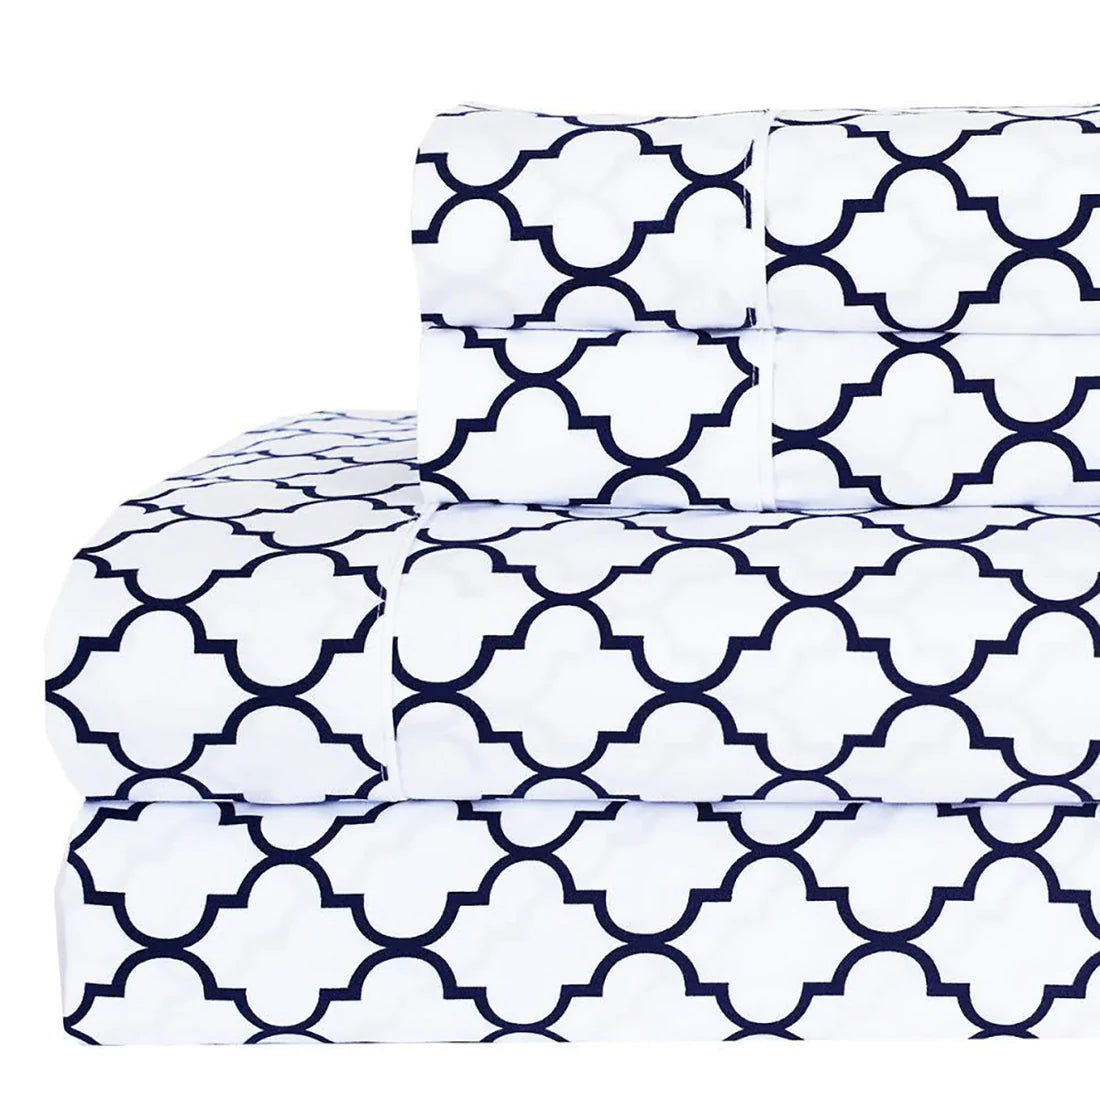 Buy Printed Meridian Percale Combed Cotton Navy and White Sheet Set G at- Egyptianhomelinens.com